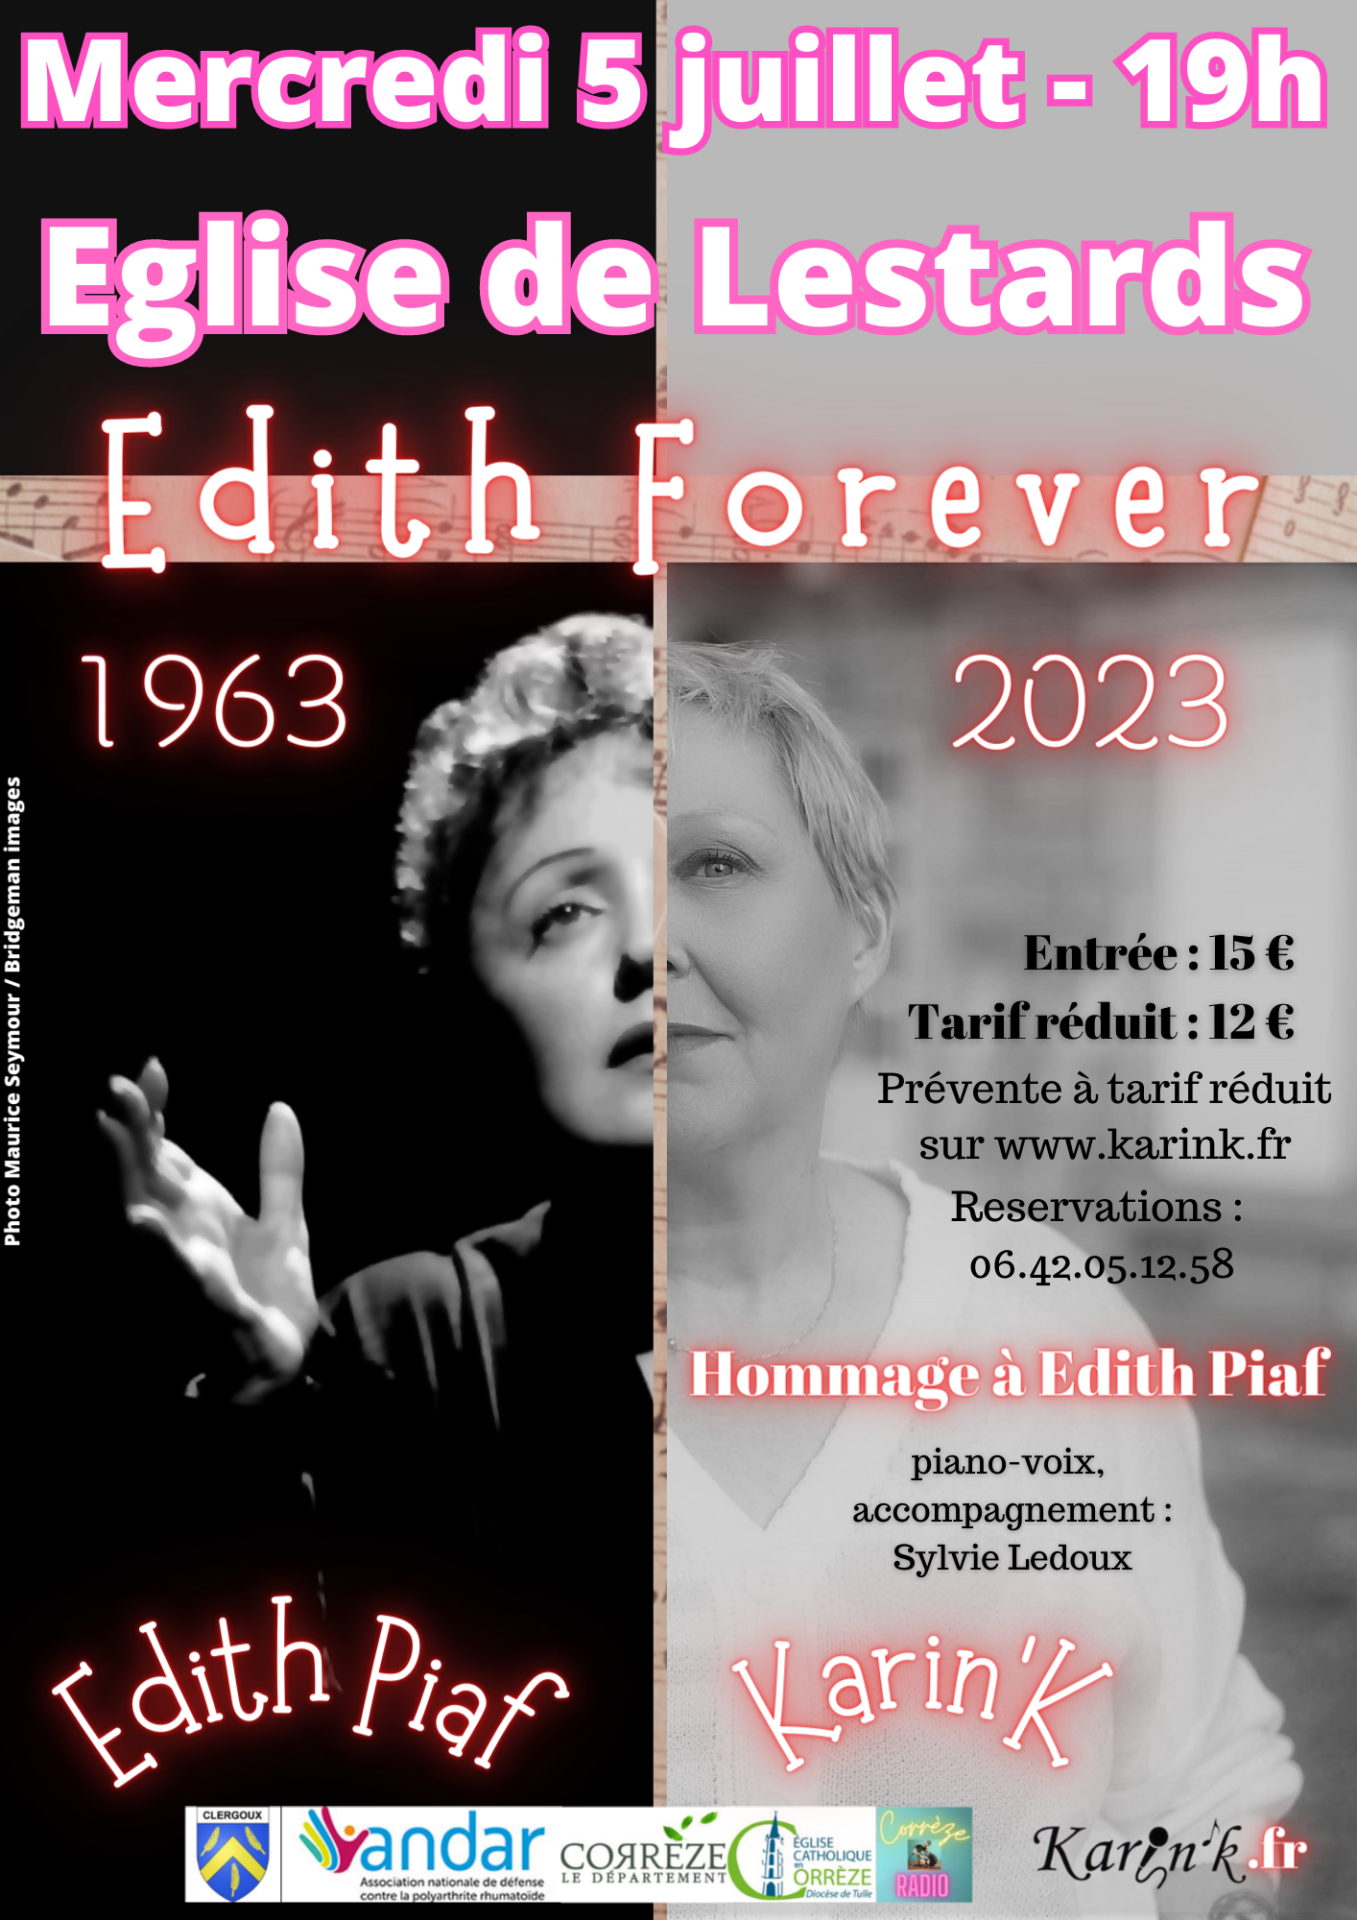 Edith forever 17